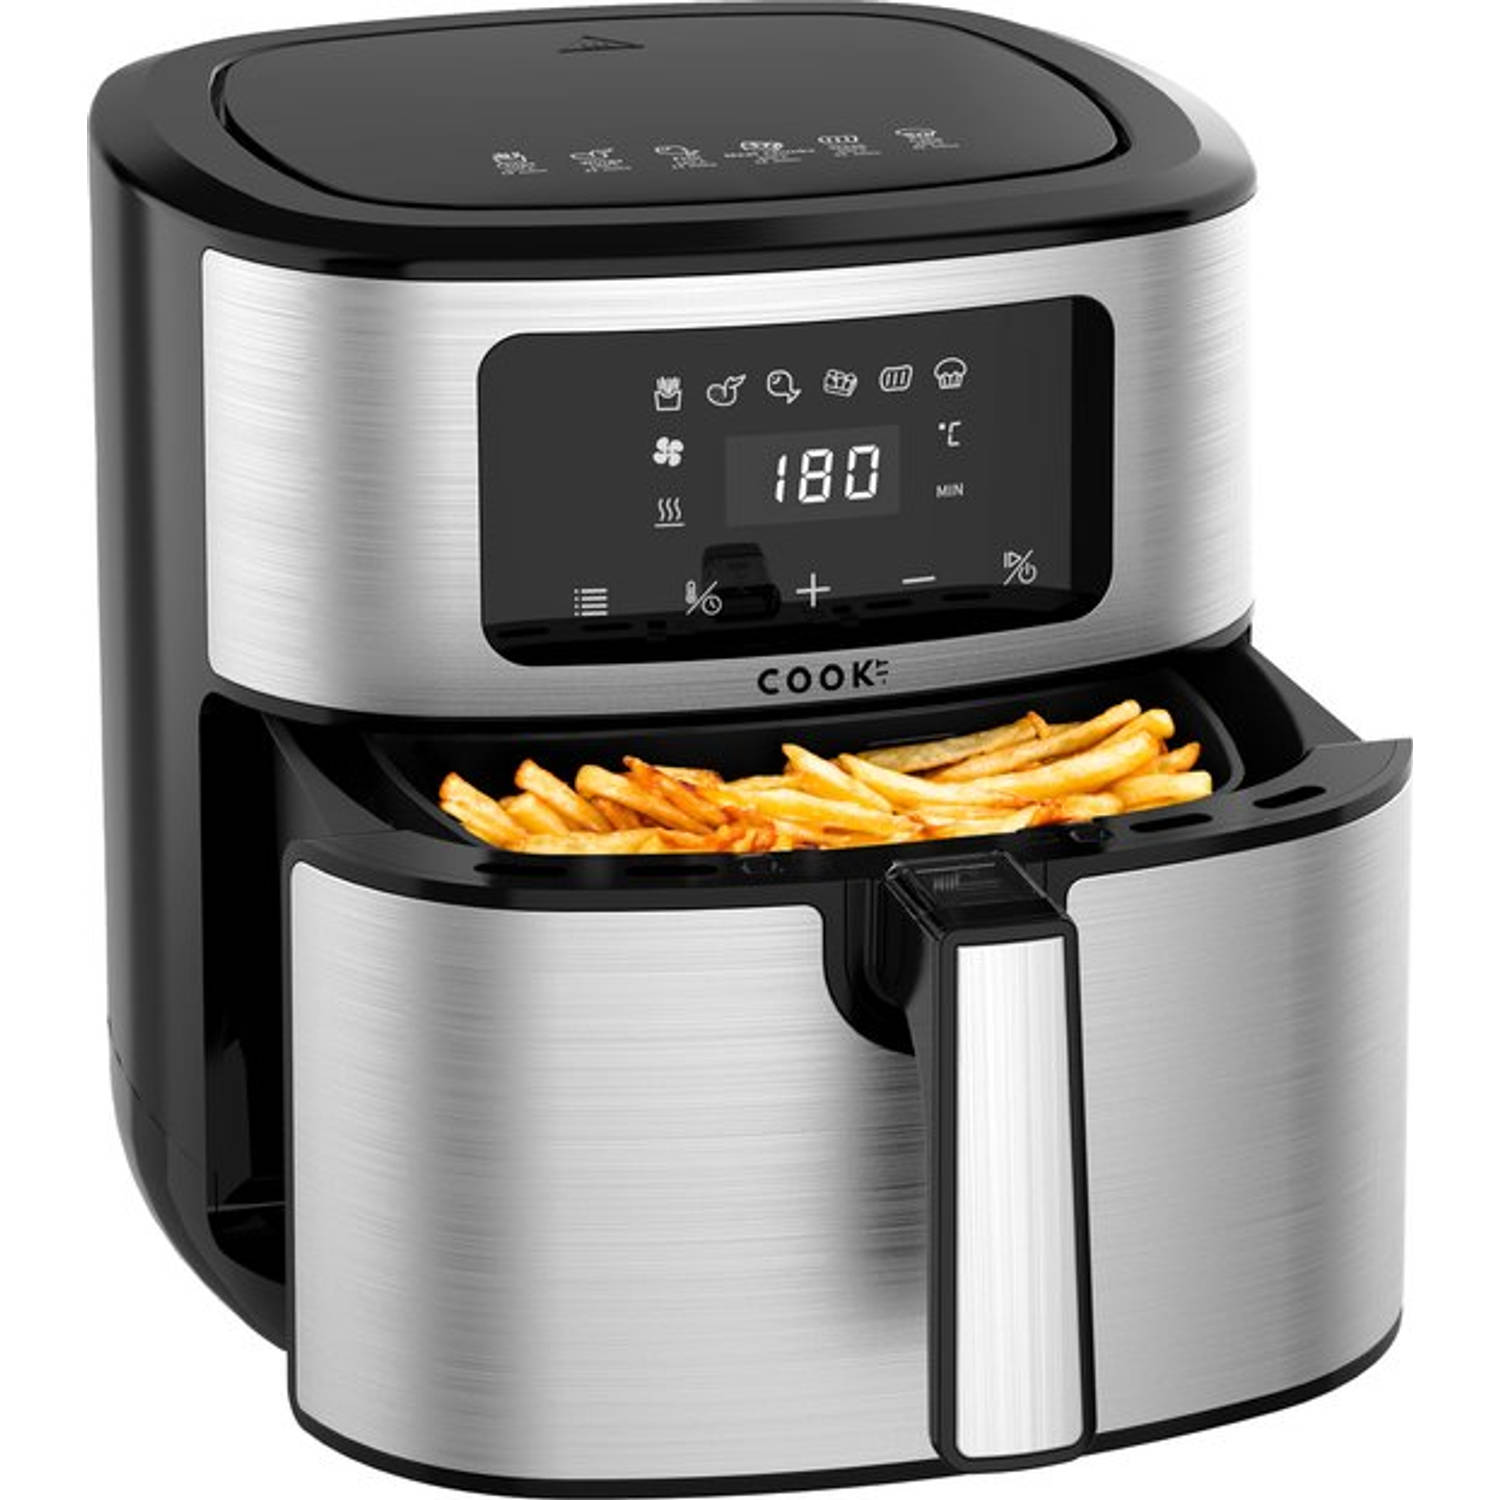 COOK-IT - Airfryer - 8L